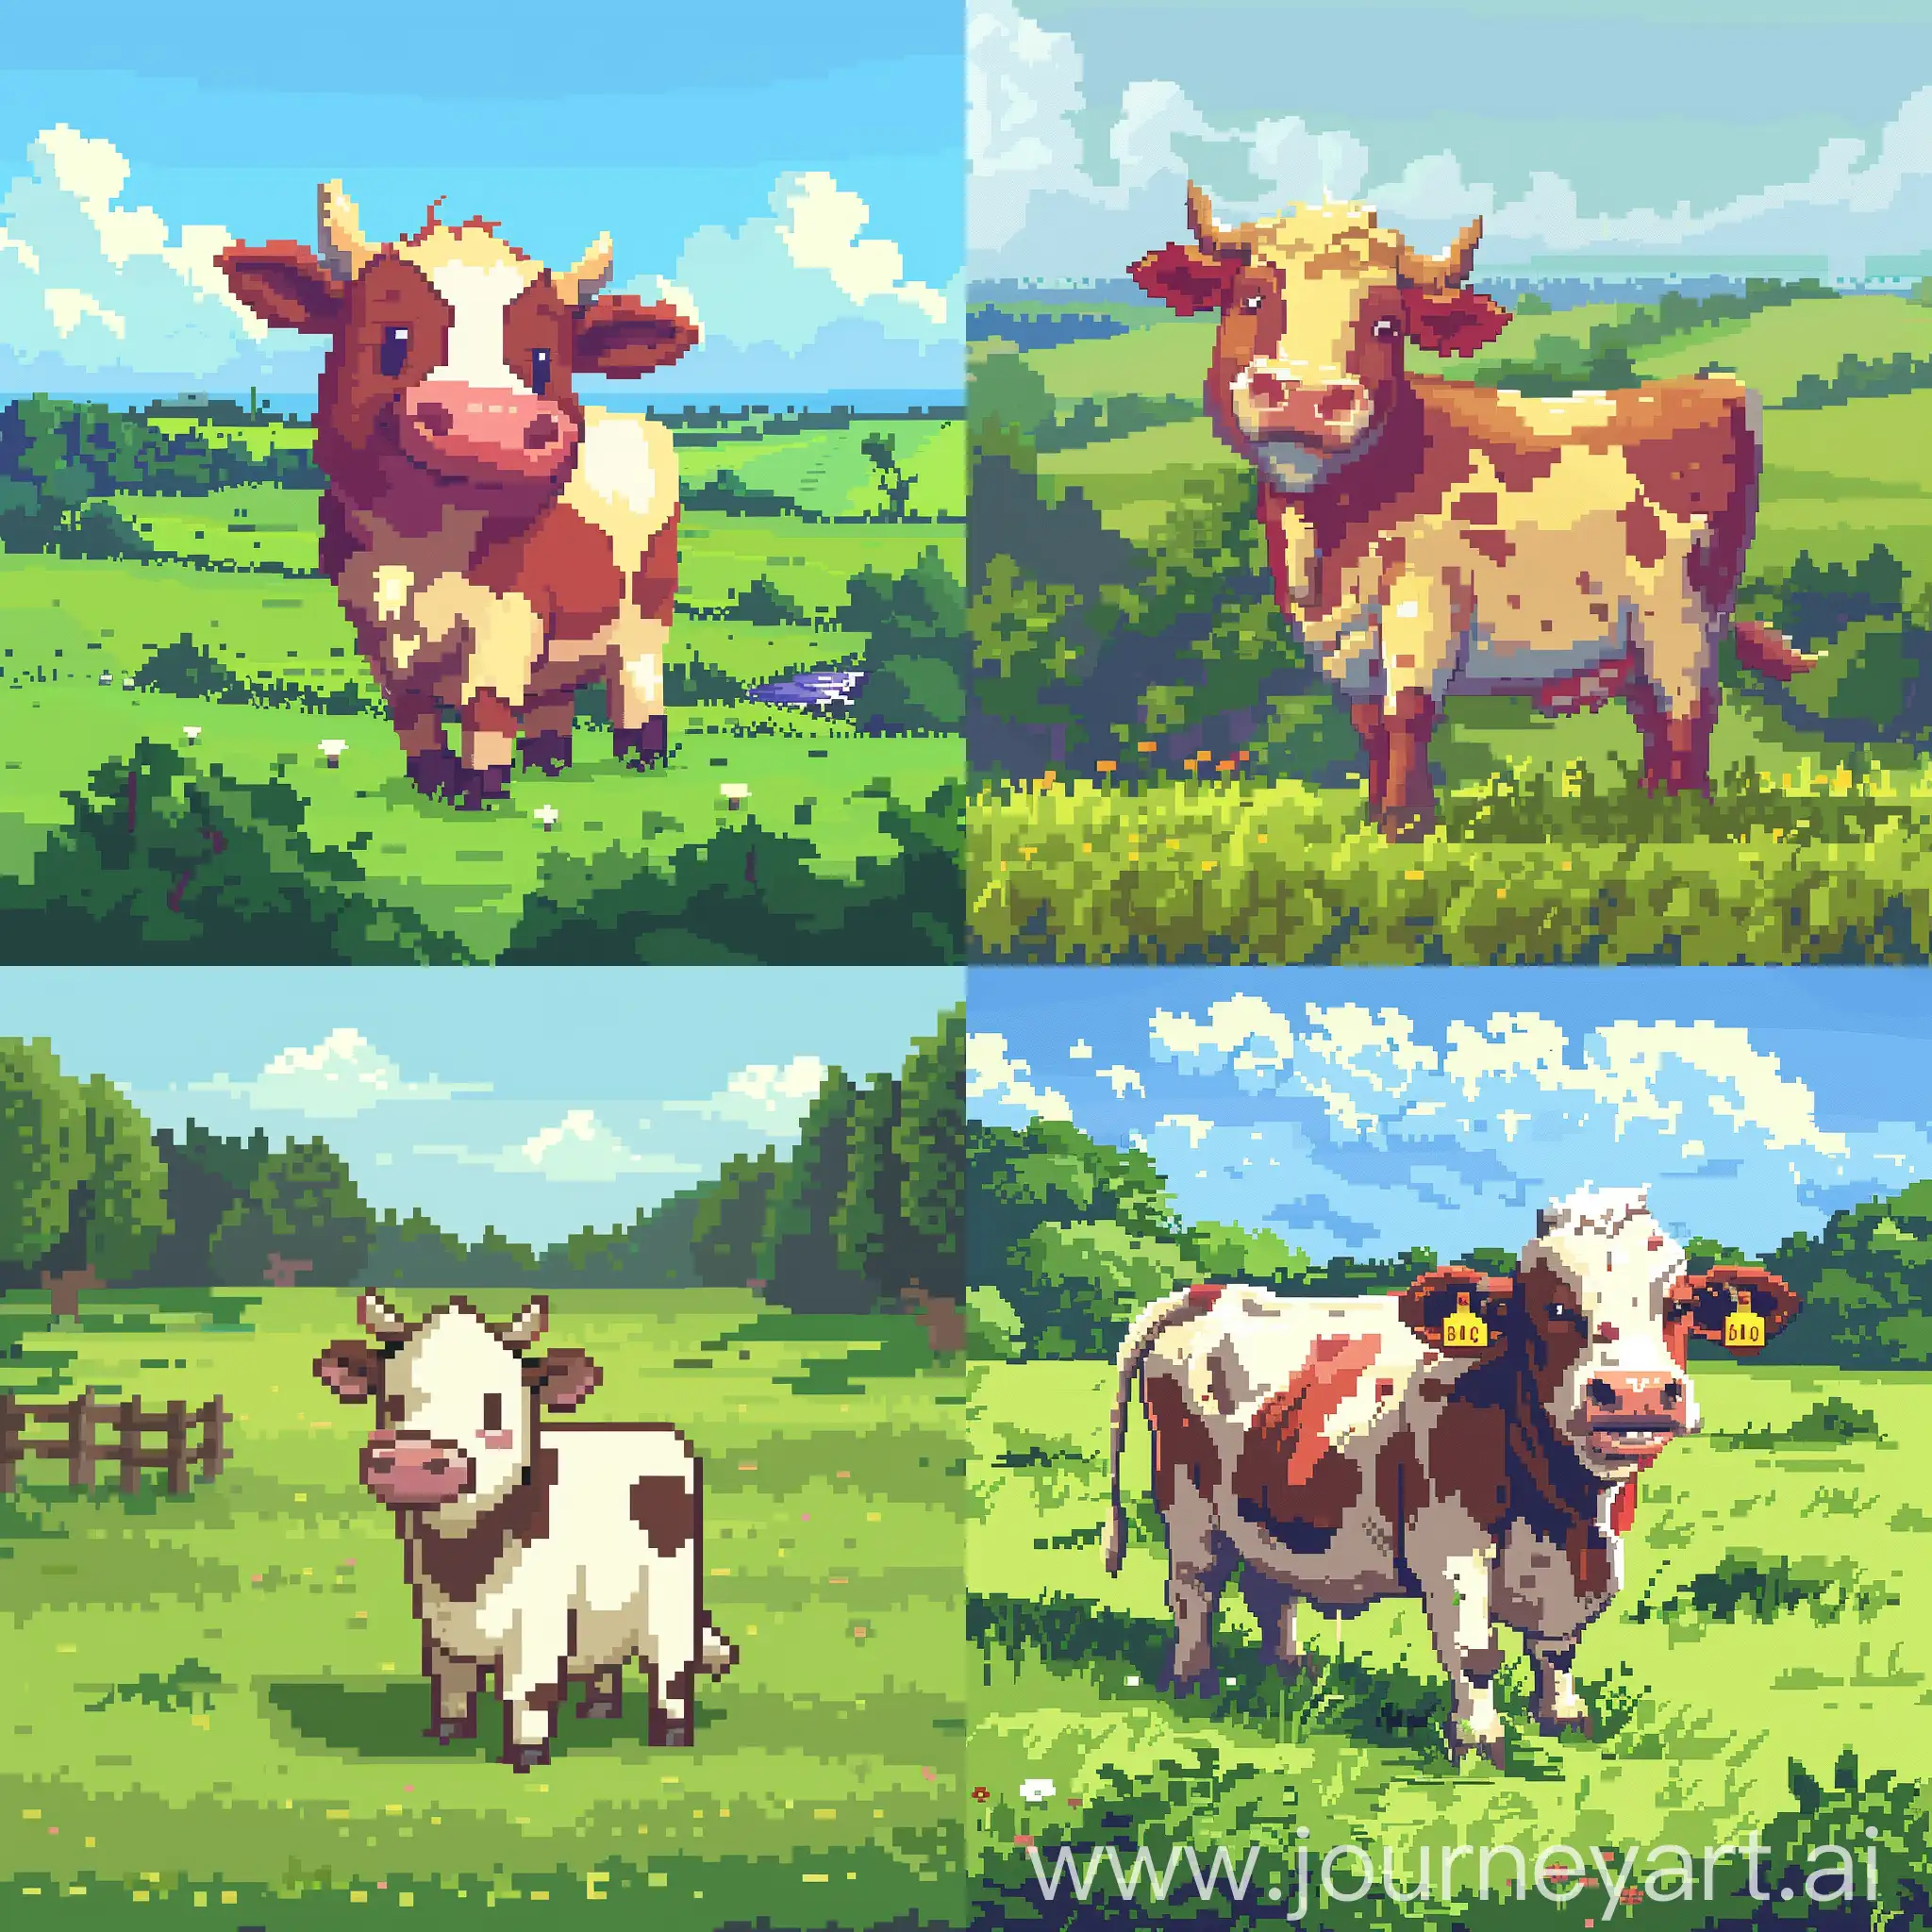 Chubby-Cute-Cowsay-in-Green-Fields-Dev-Lore-and-Clichs